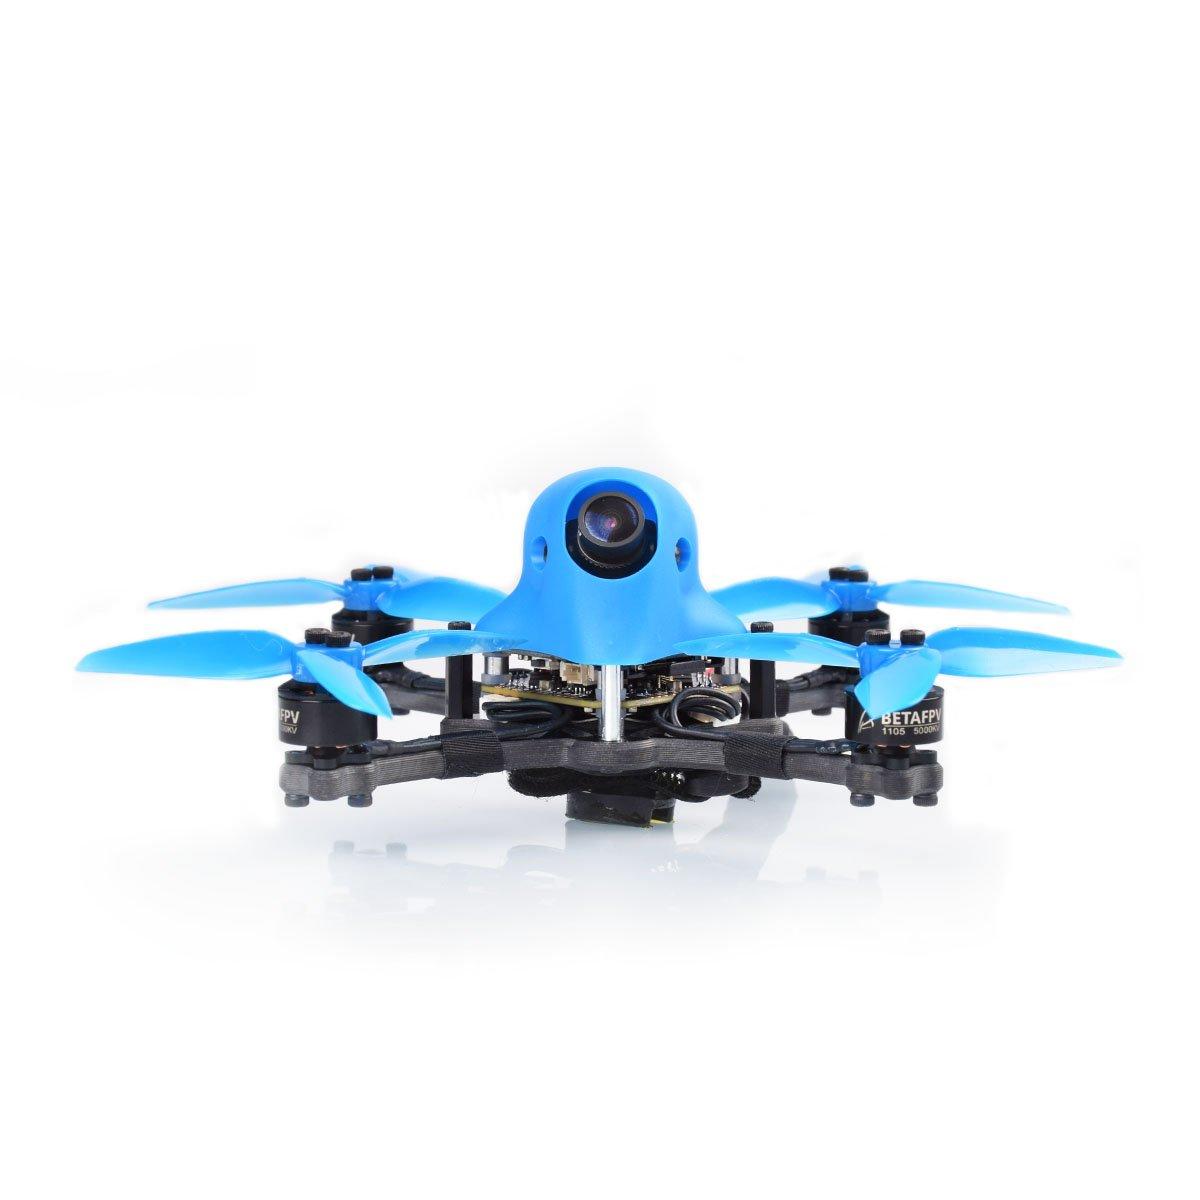 BETAFPV 2pcs HX115 Toothpick Frame T700 Carbon Fiber Frame Kit Matte and Smooth Material for HX115 Toothpick Quadcopter F4 2-4S 12A AIO Toothpick FC